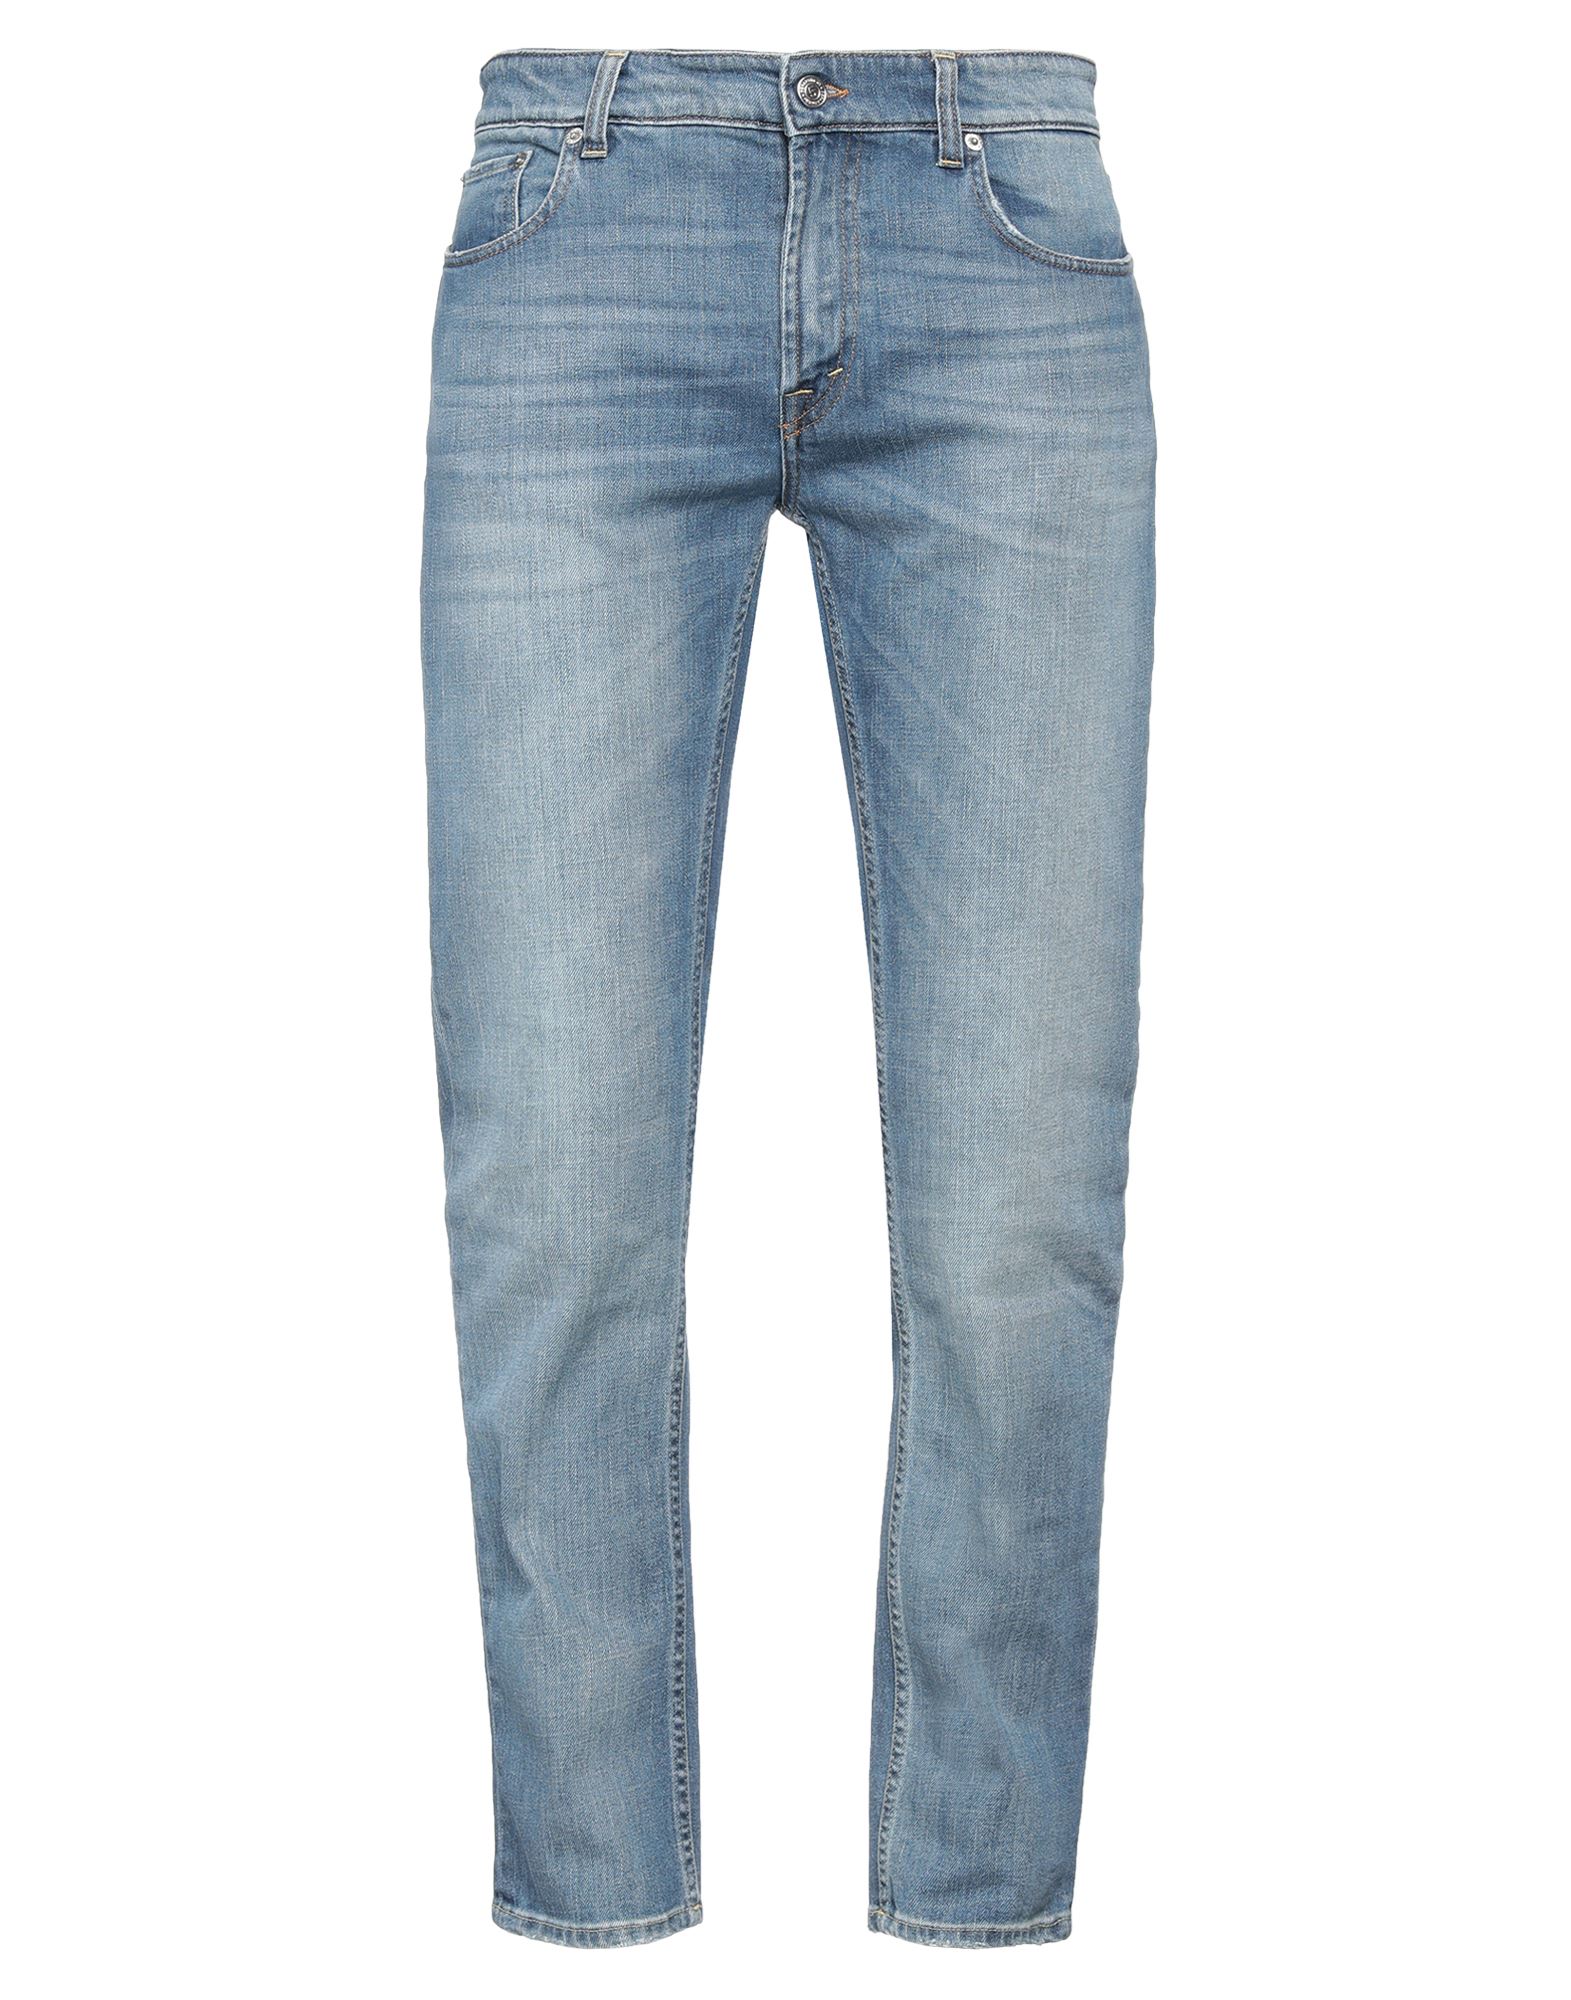 Department 5 Jeans In Blue